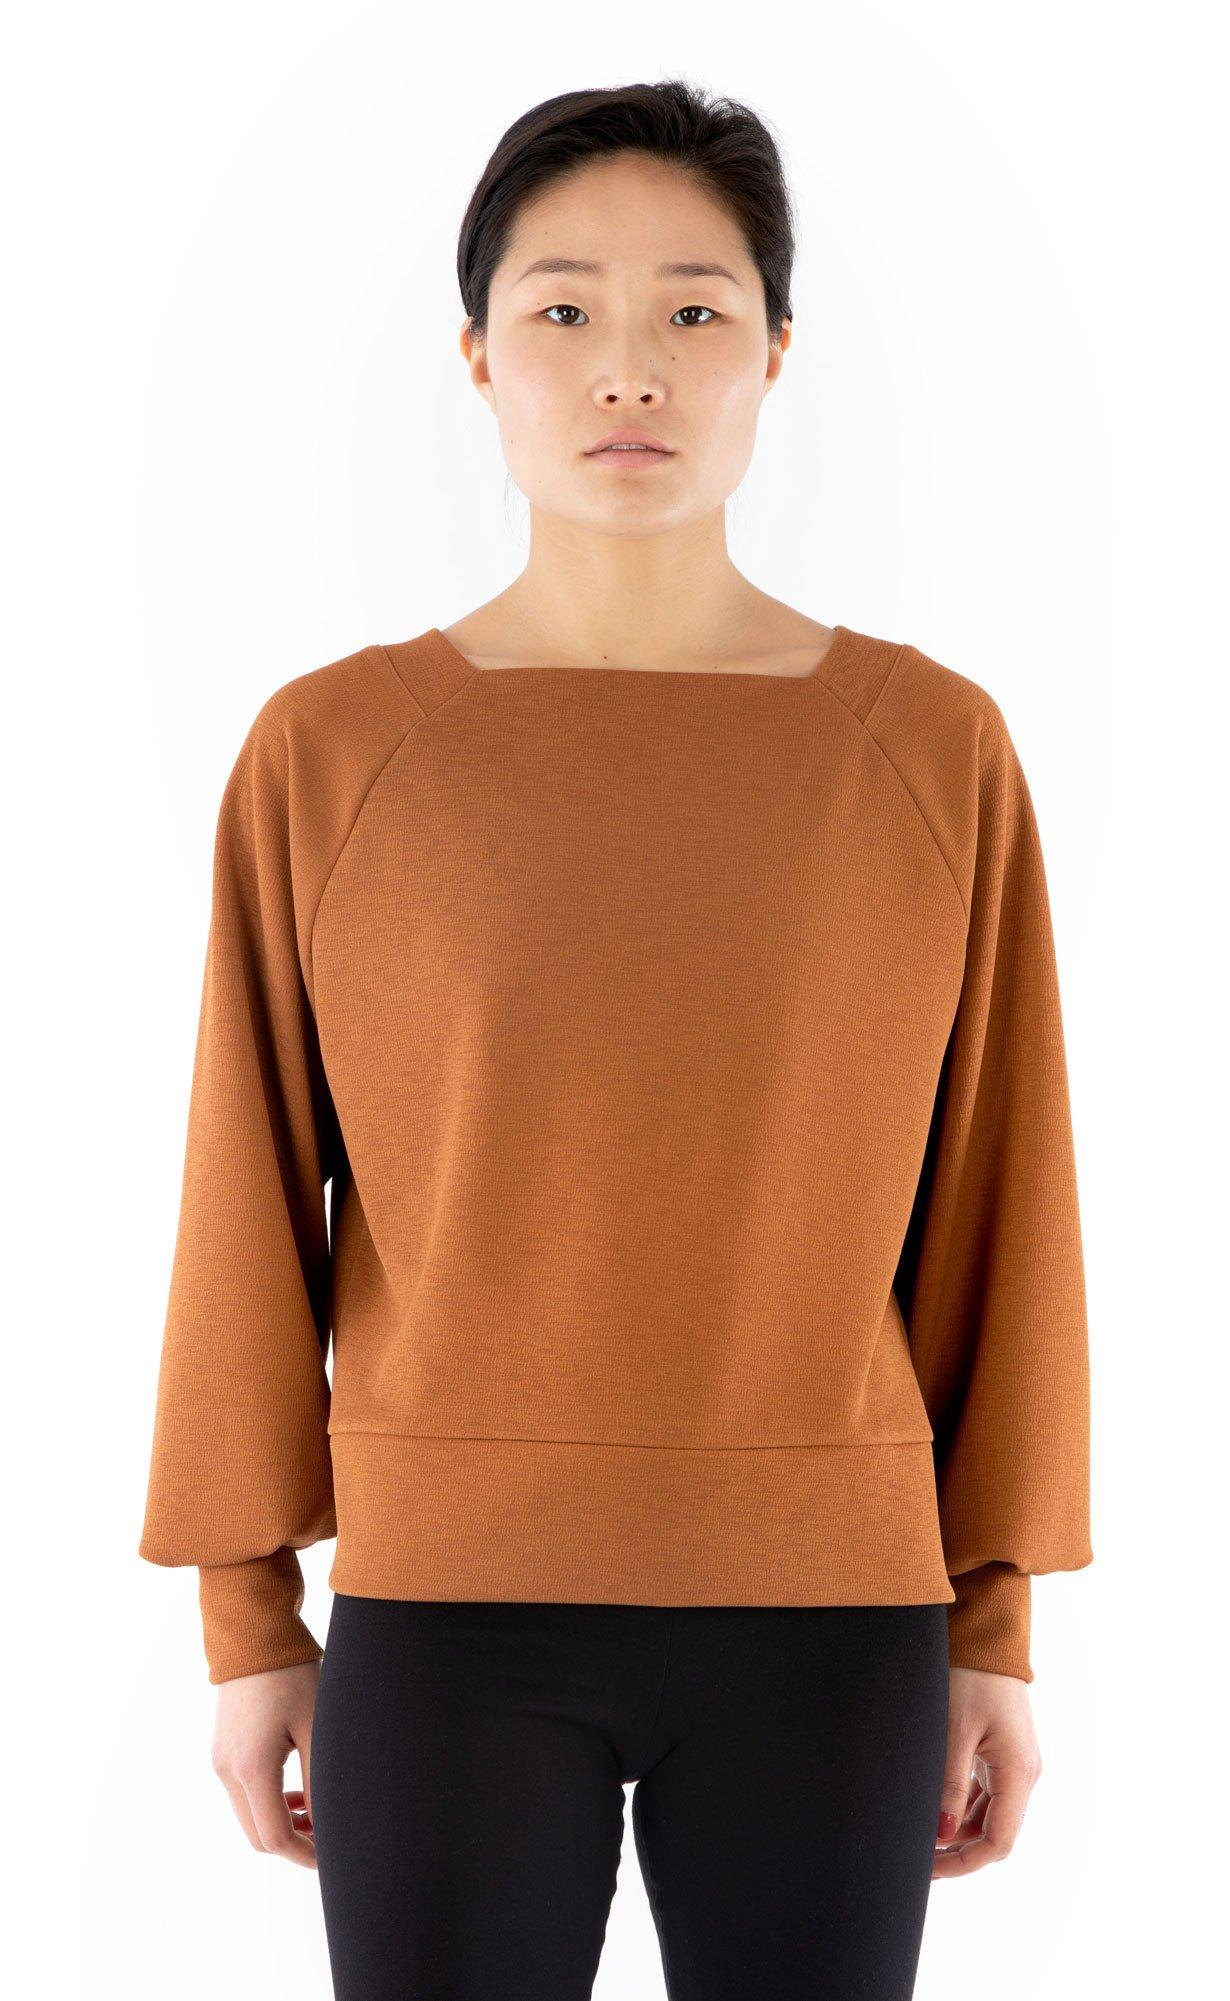 Puff sleeve + square neck